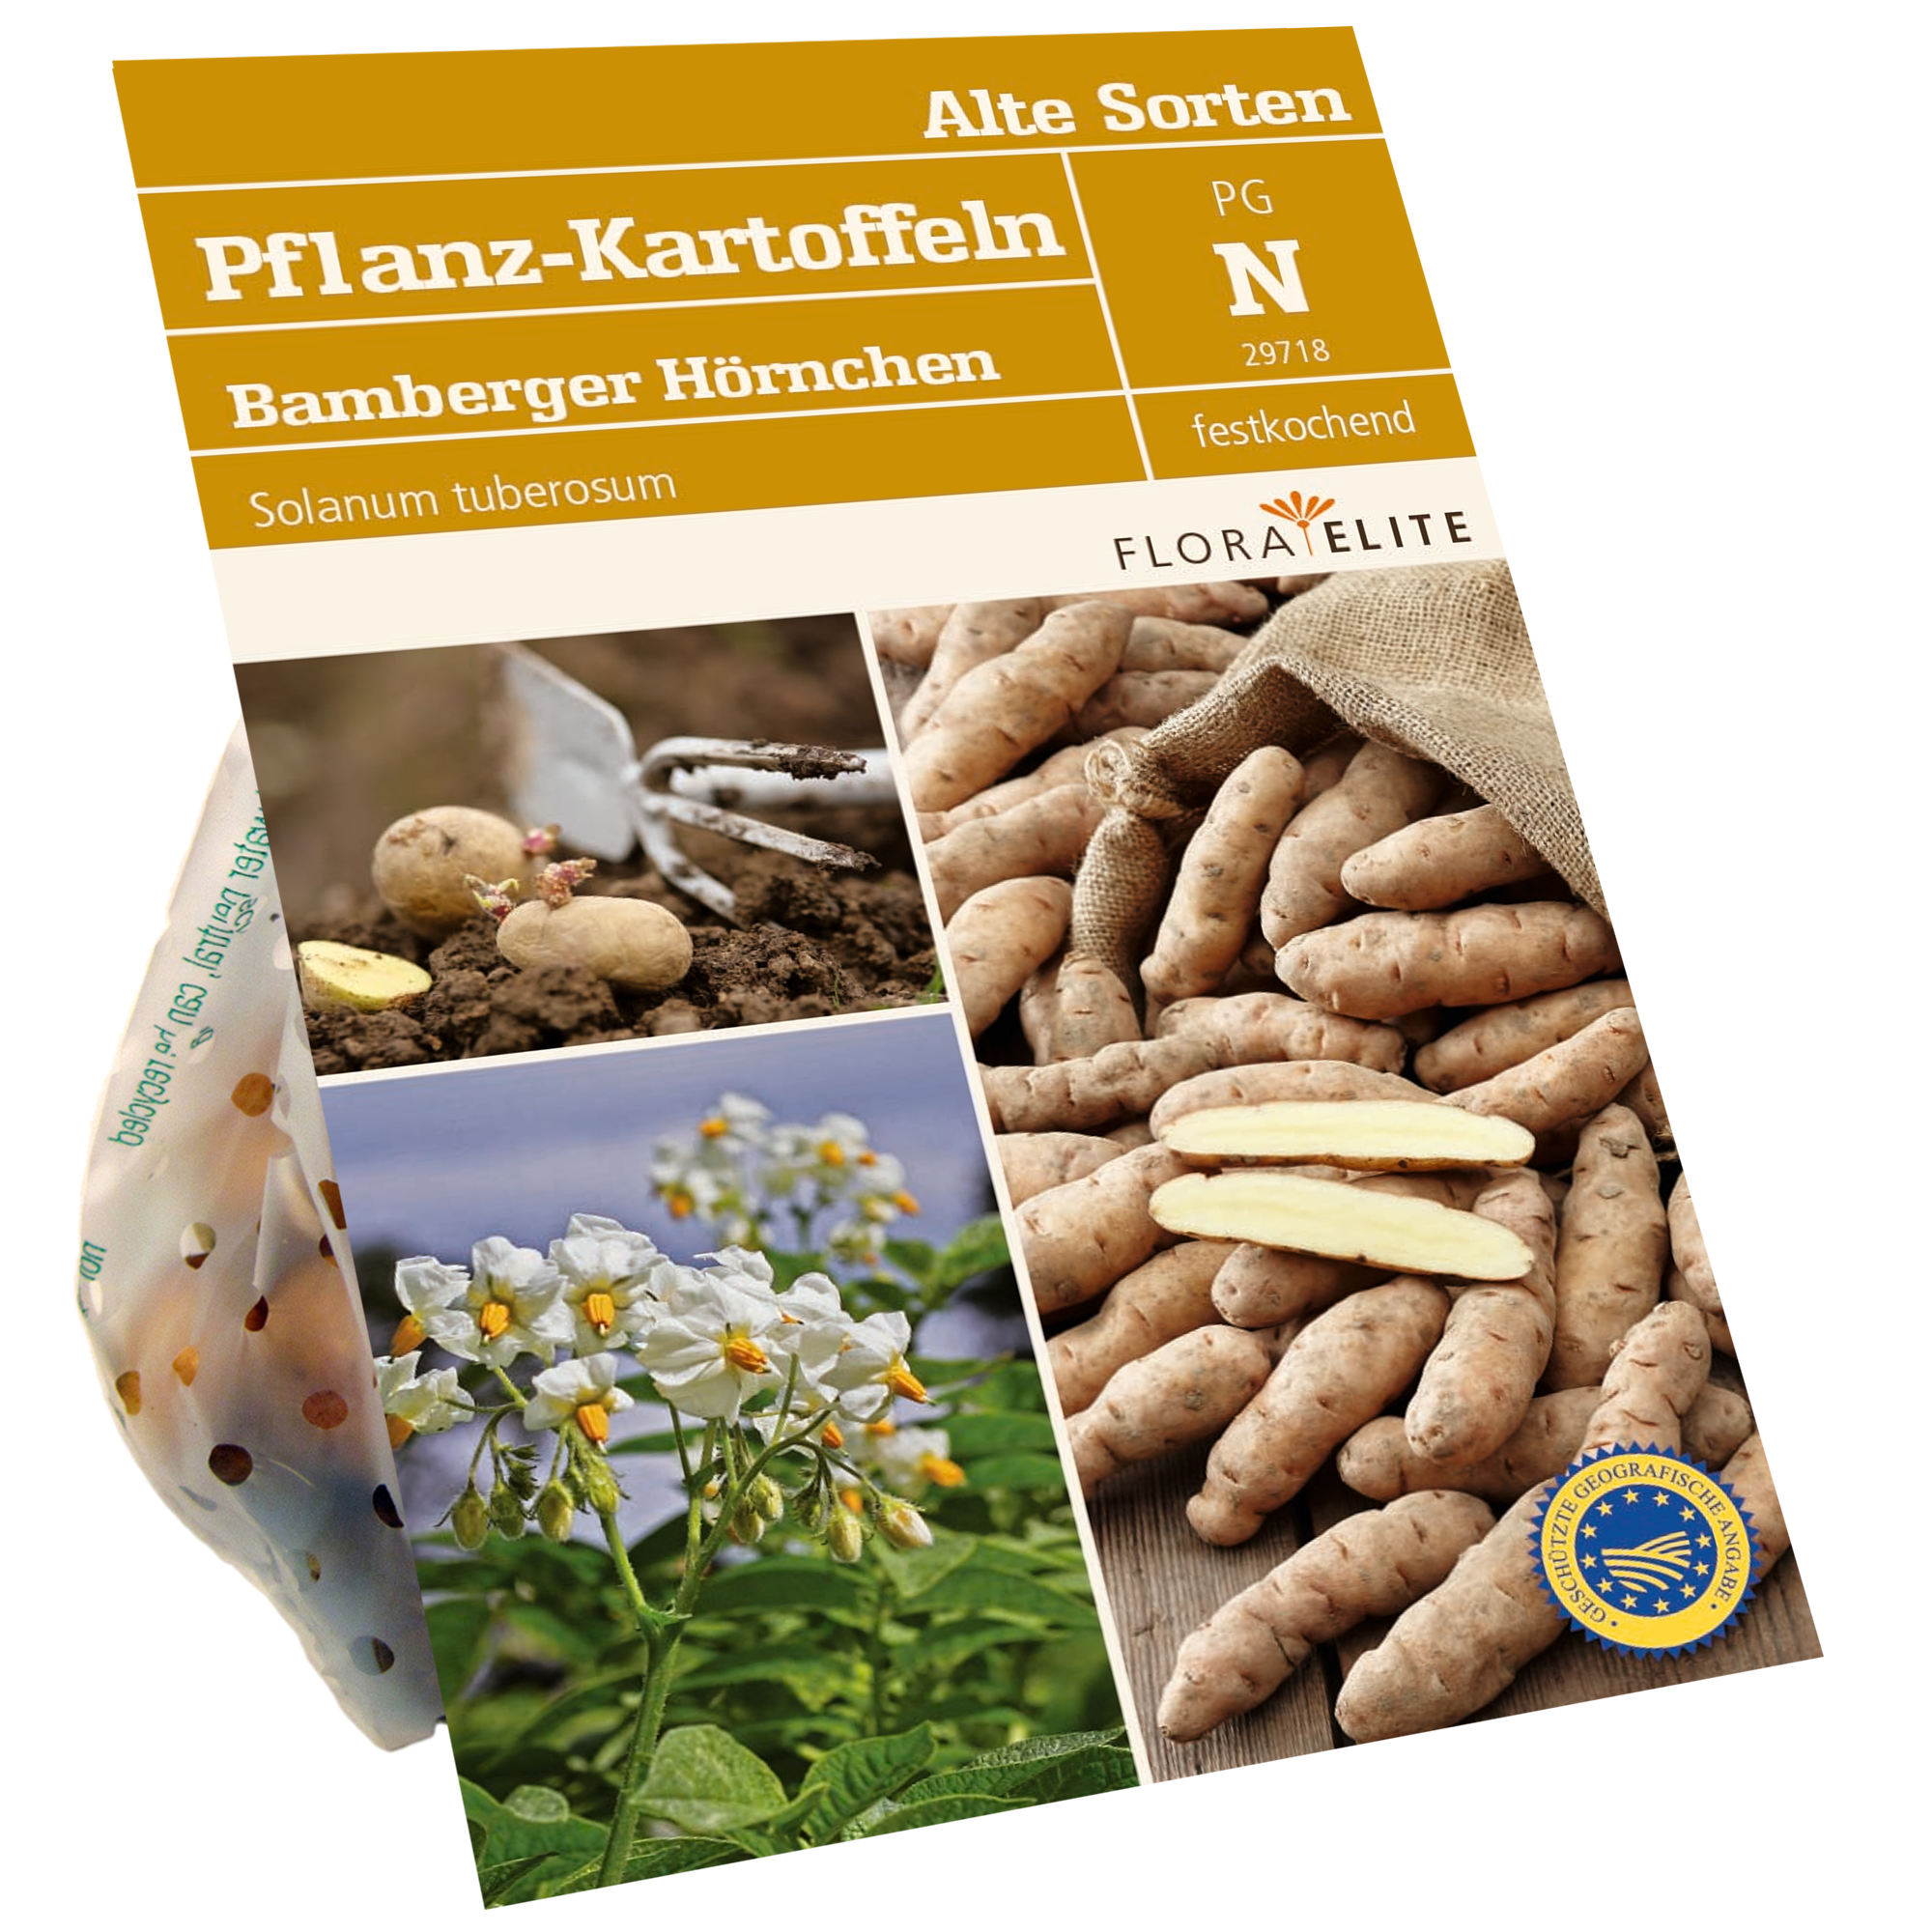 Pflanzkartoffeln 'Bamberger Hörnchen' 500 g + product picture